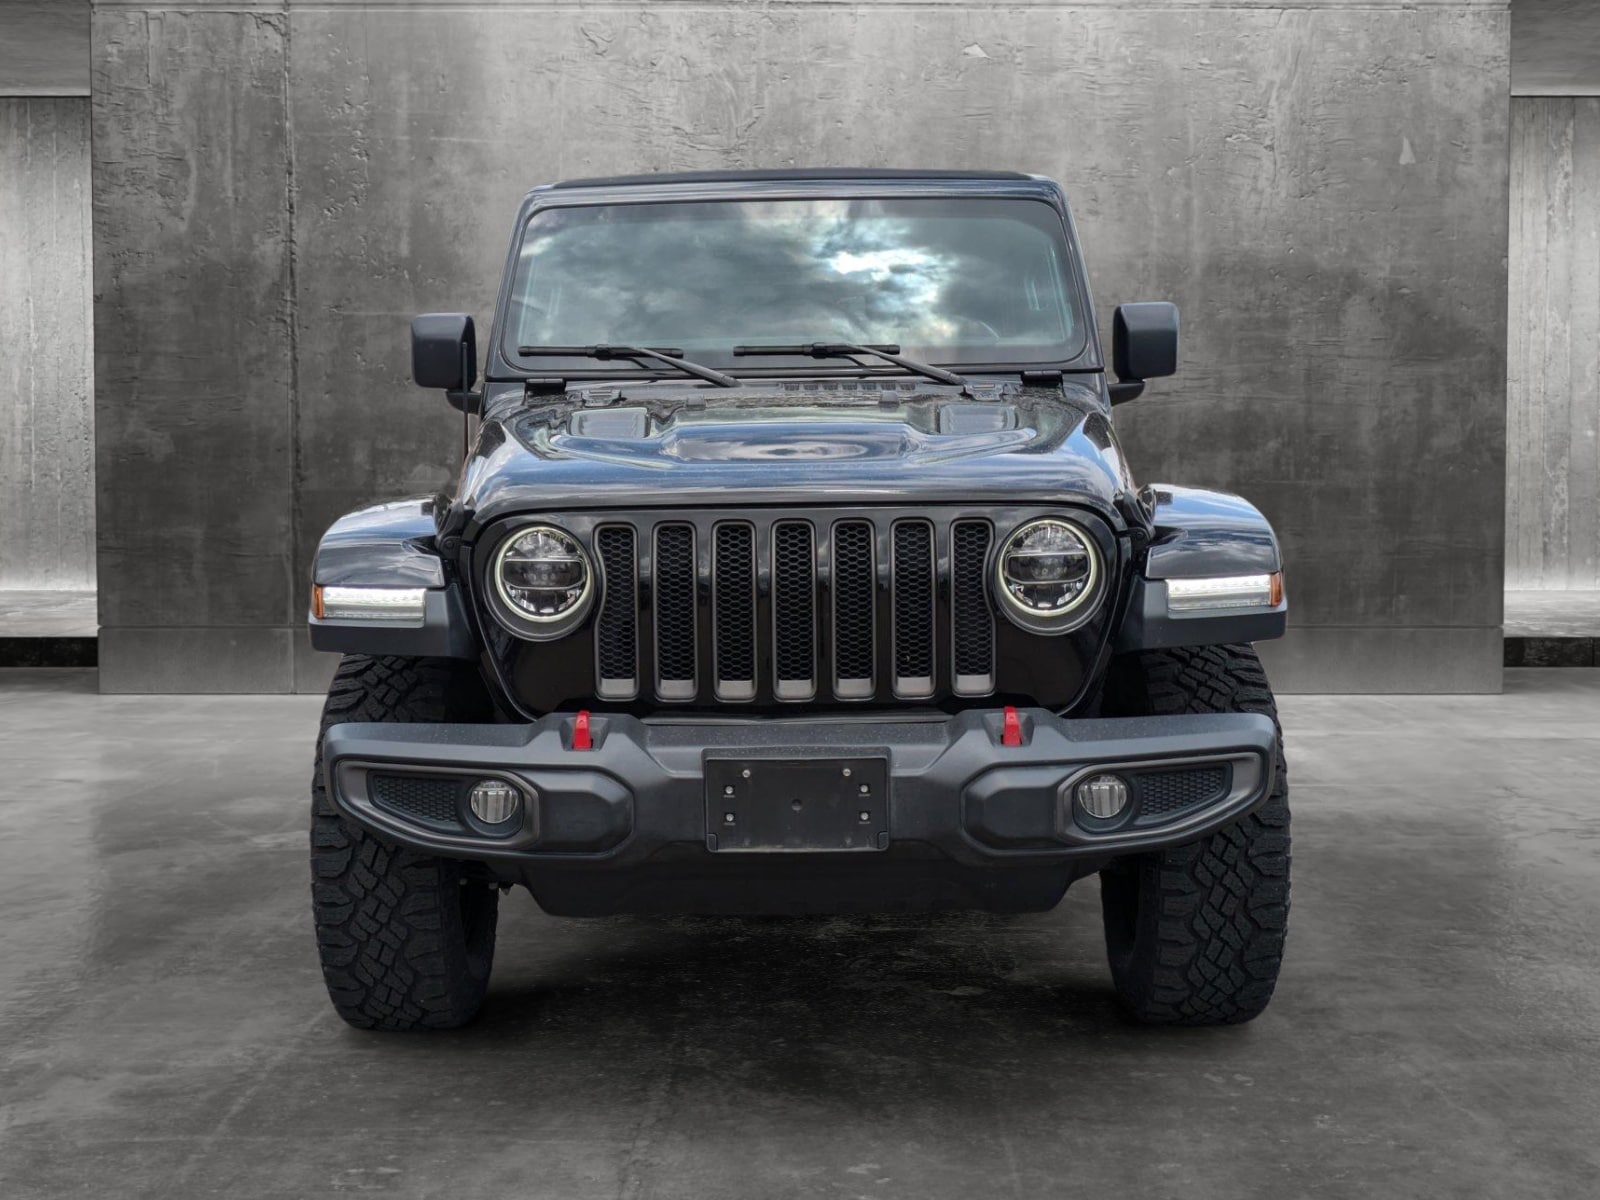 Used 2020 Jeep Wrangler Unlimited Rubicon with VIN 1C4HJXFG5LW253653 for sale in Colorado Springs, CO